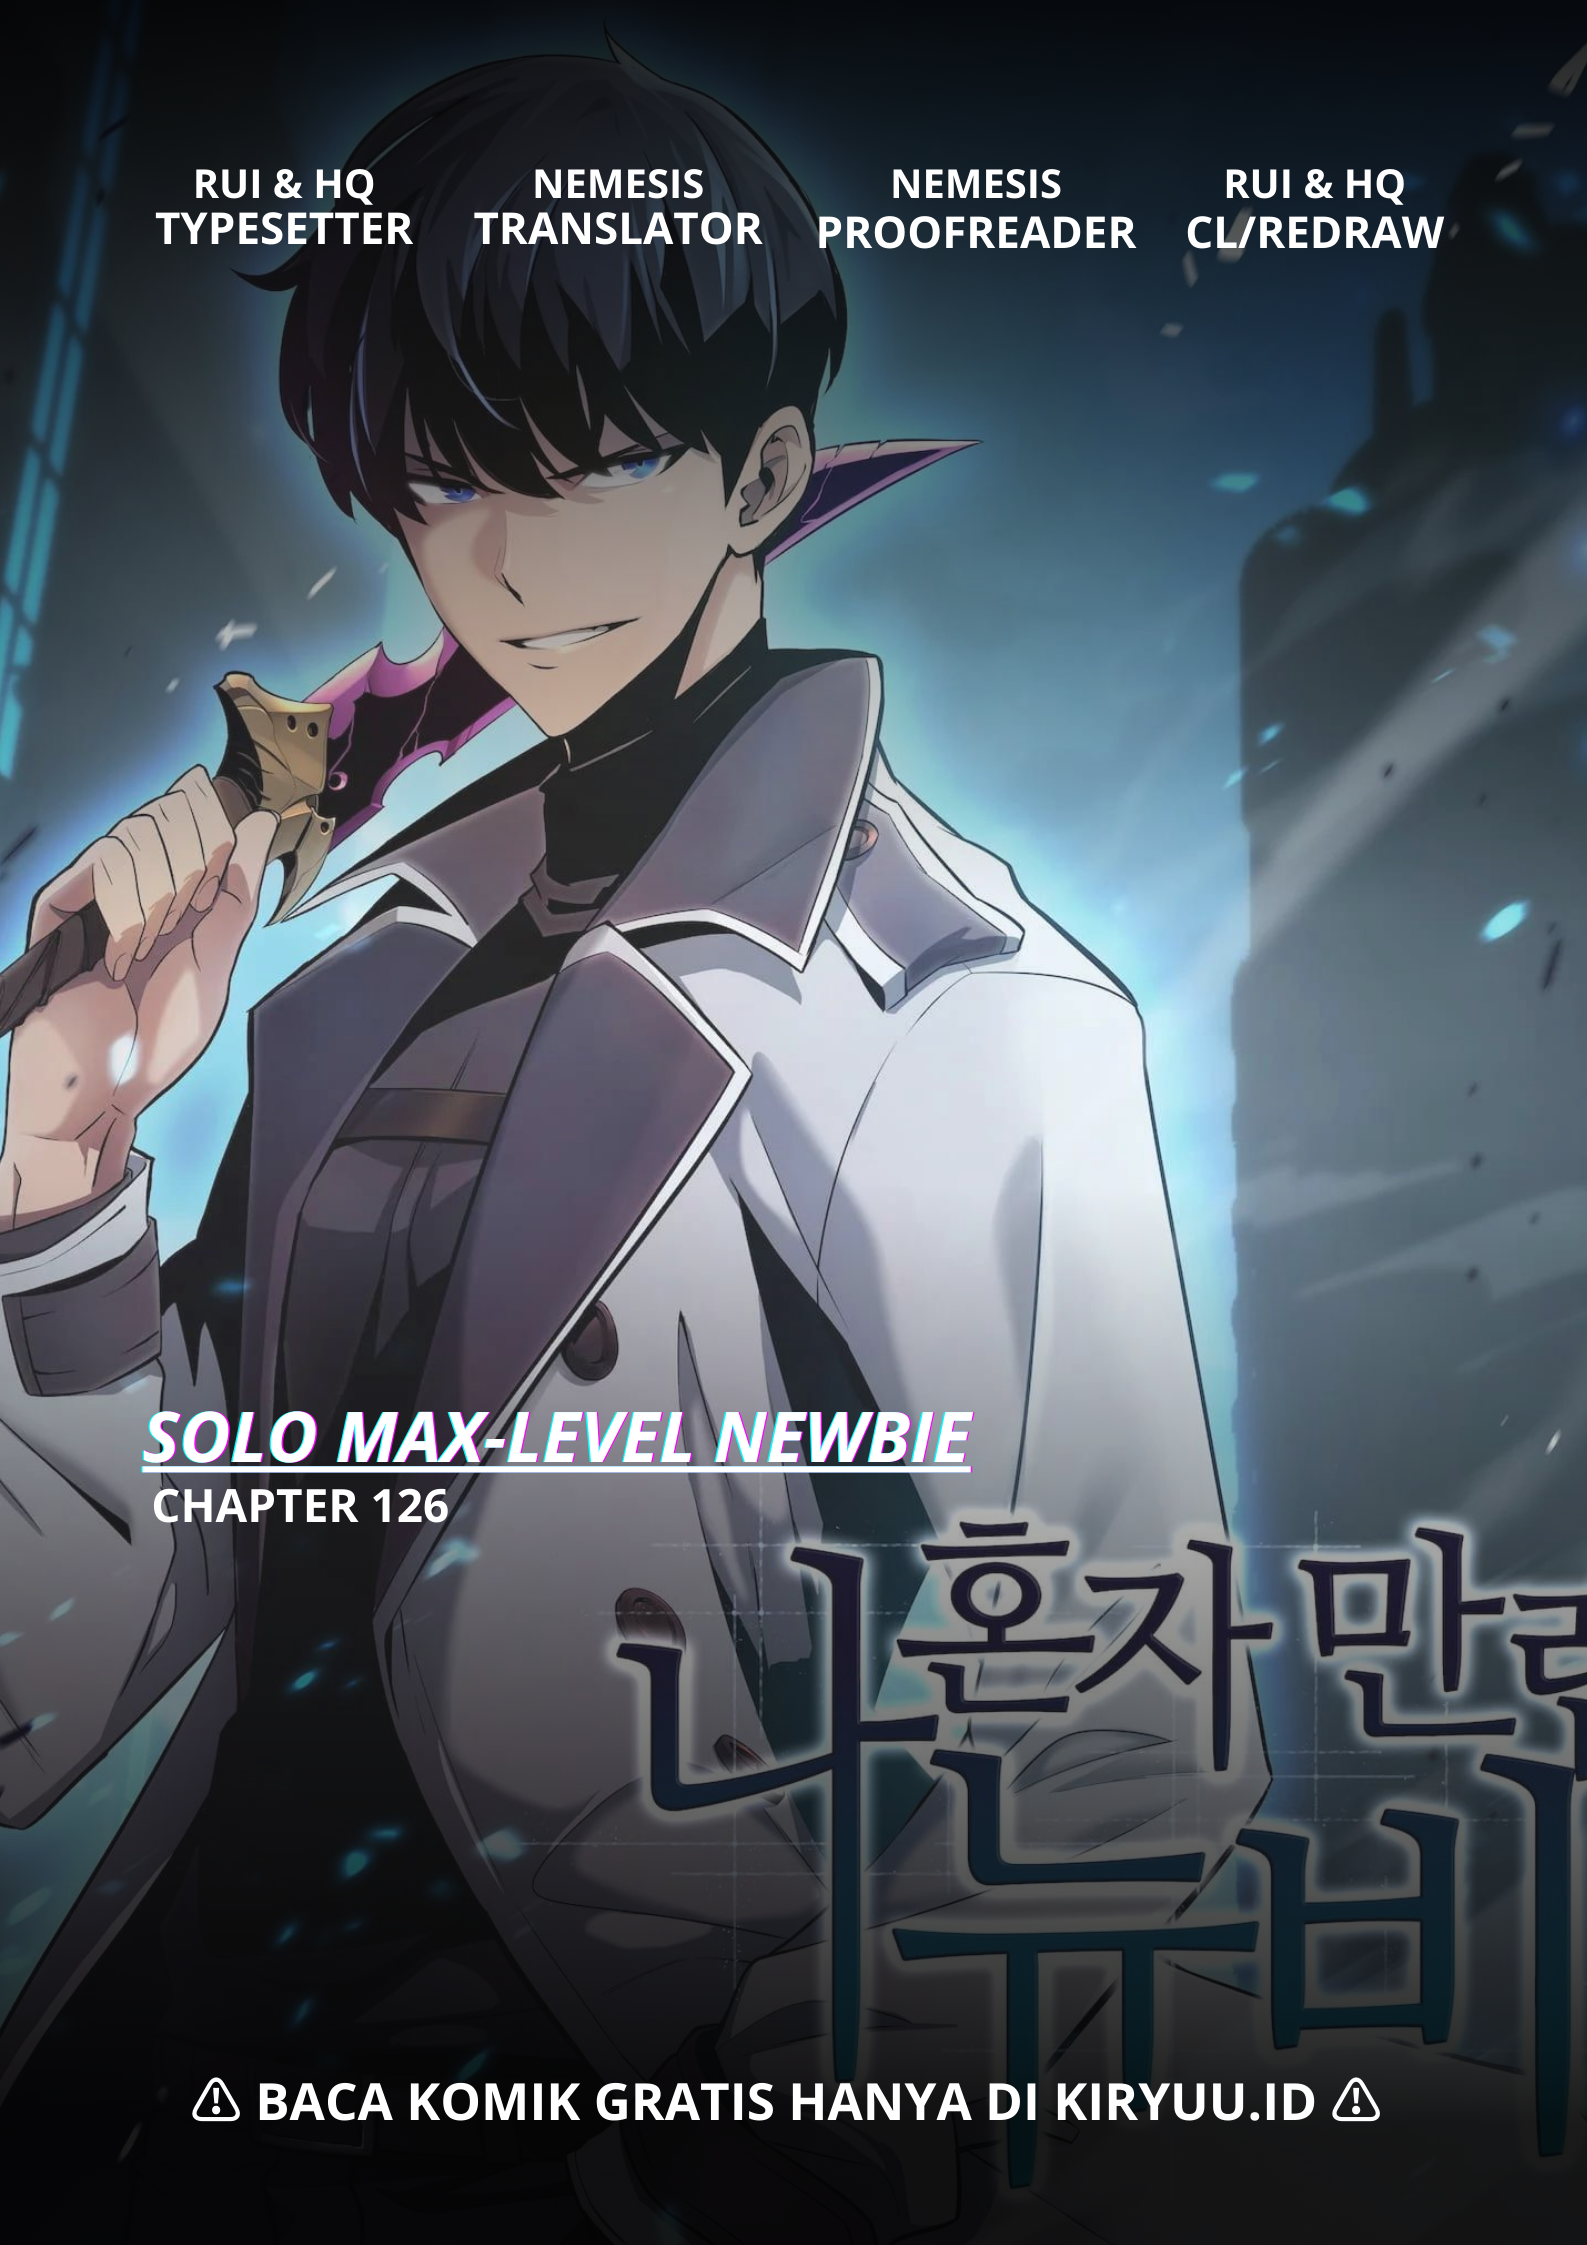 Solo Max-Level Newbie Chapter 126 Image 0